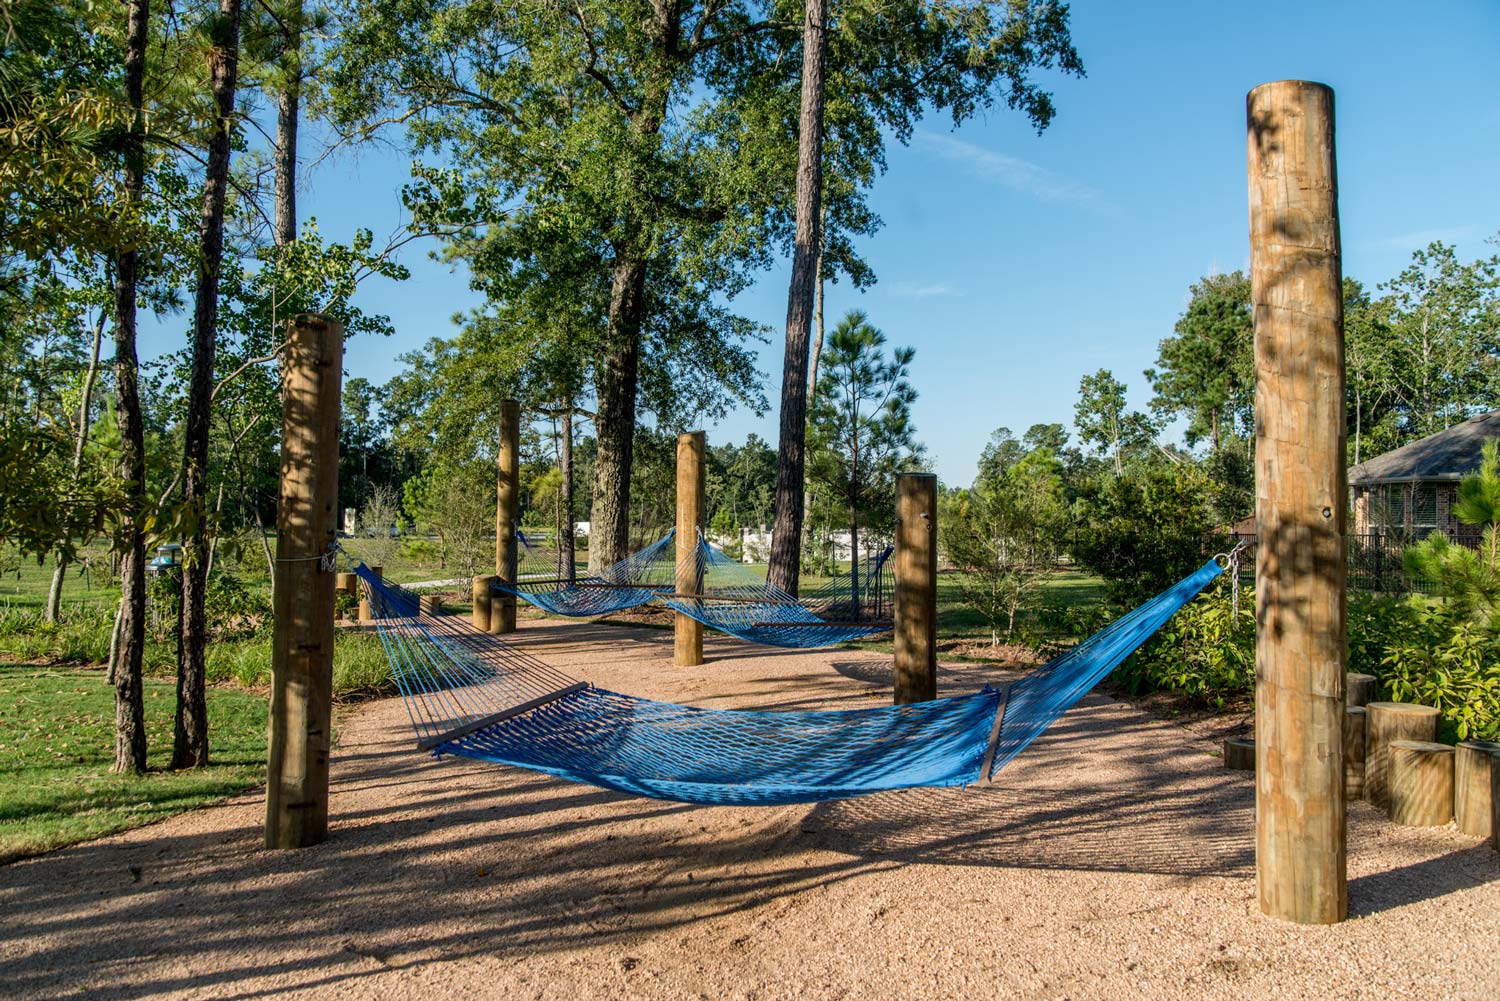 Experience the best of Madera Creek from a hammock in the Hammock Zone.